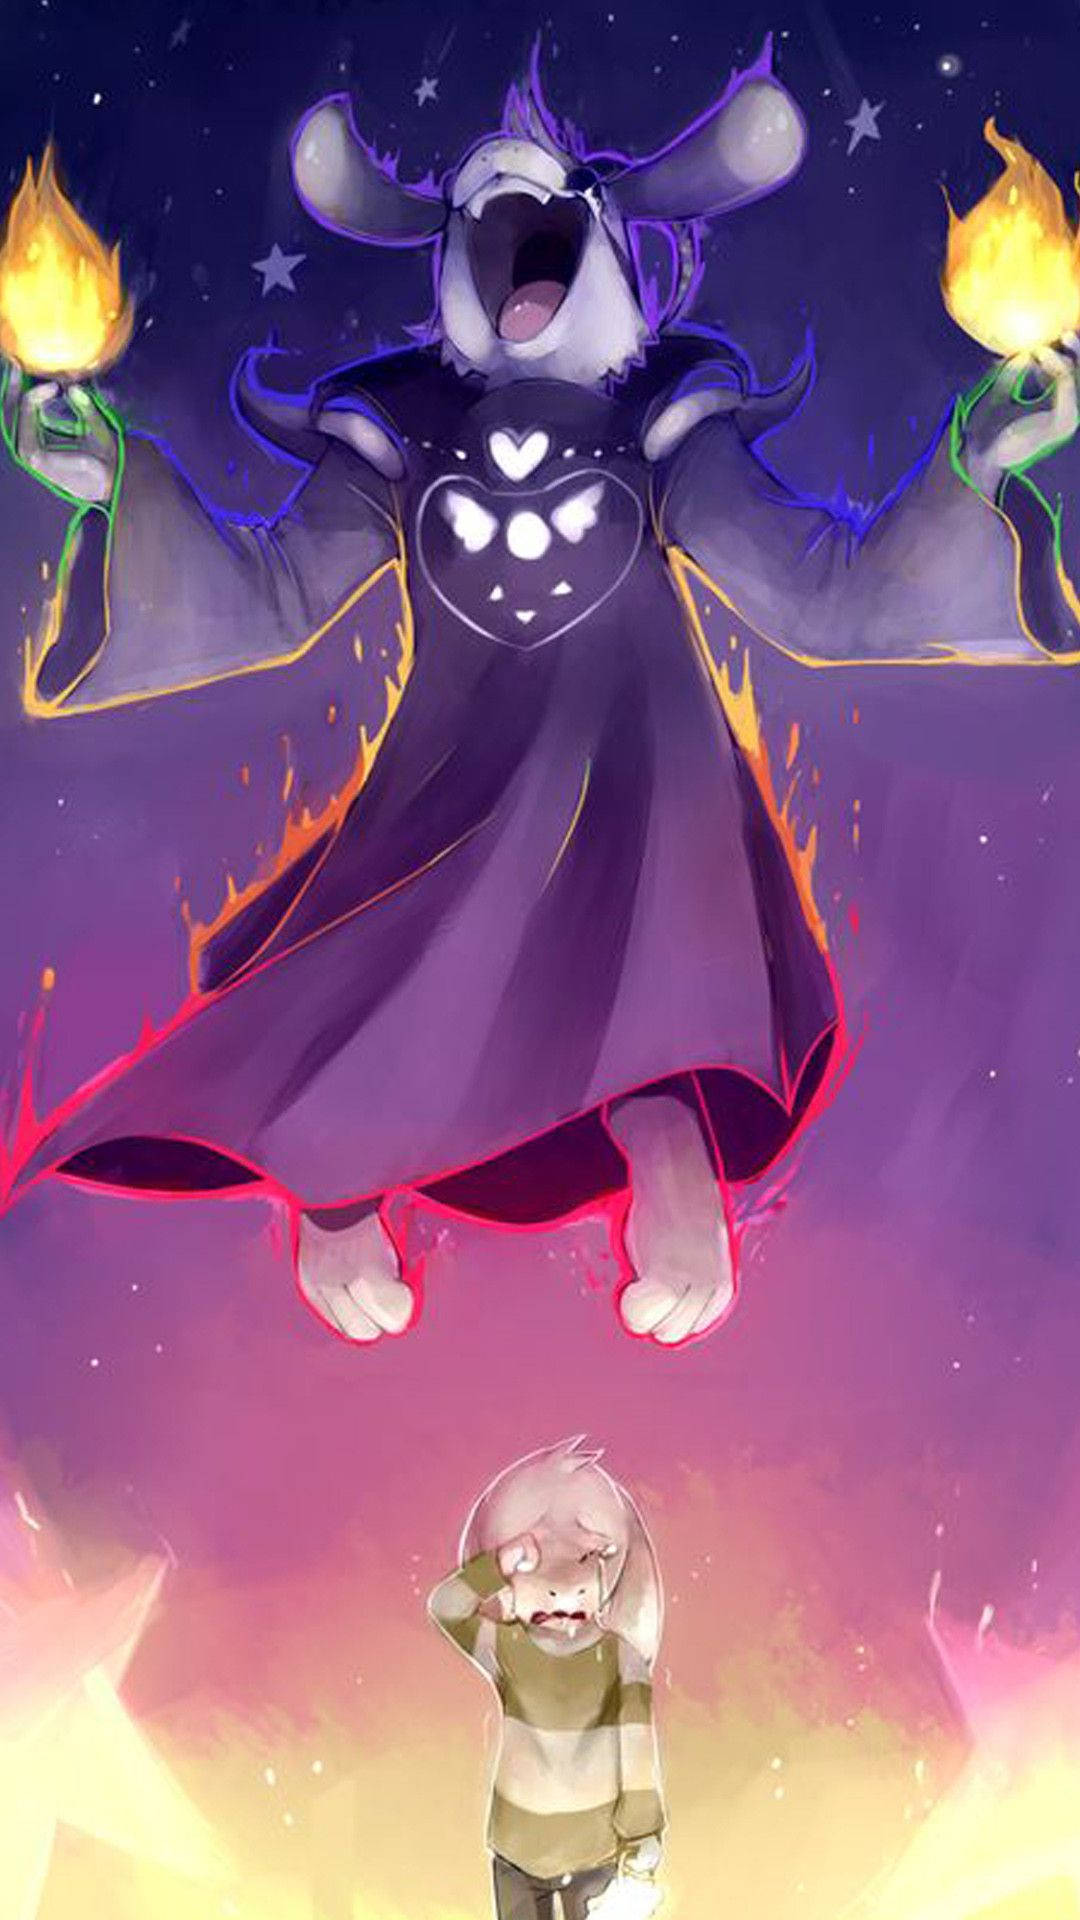 Undertale Floating Asriel And Crying Chara Wallpaper